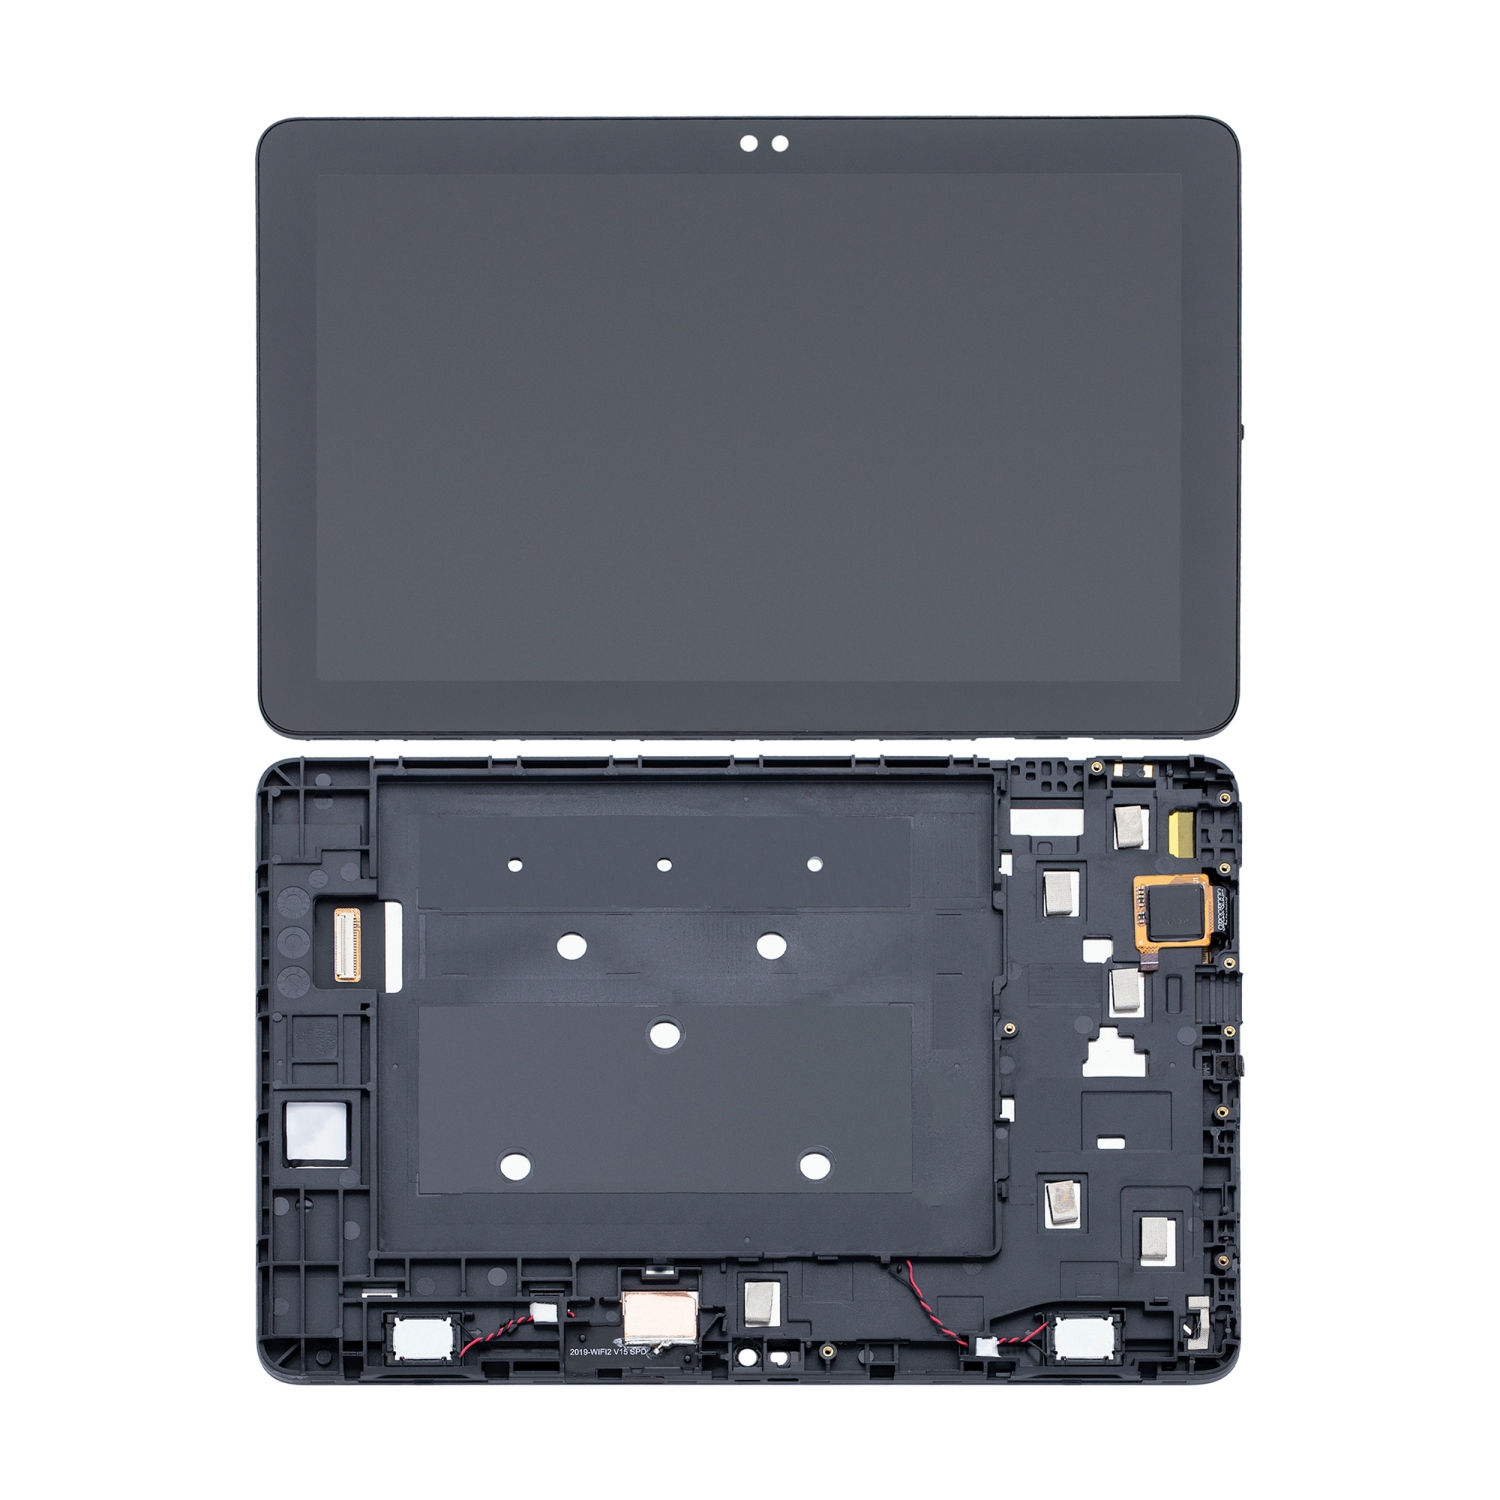 Refurbished (Excellent) - Replacement LCD Assembly With Frame Compatible For Amazon Kindle Fire HD 8 (10th Gen, 2020) (All Colors)